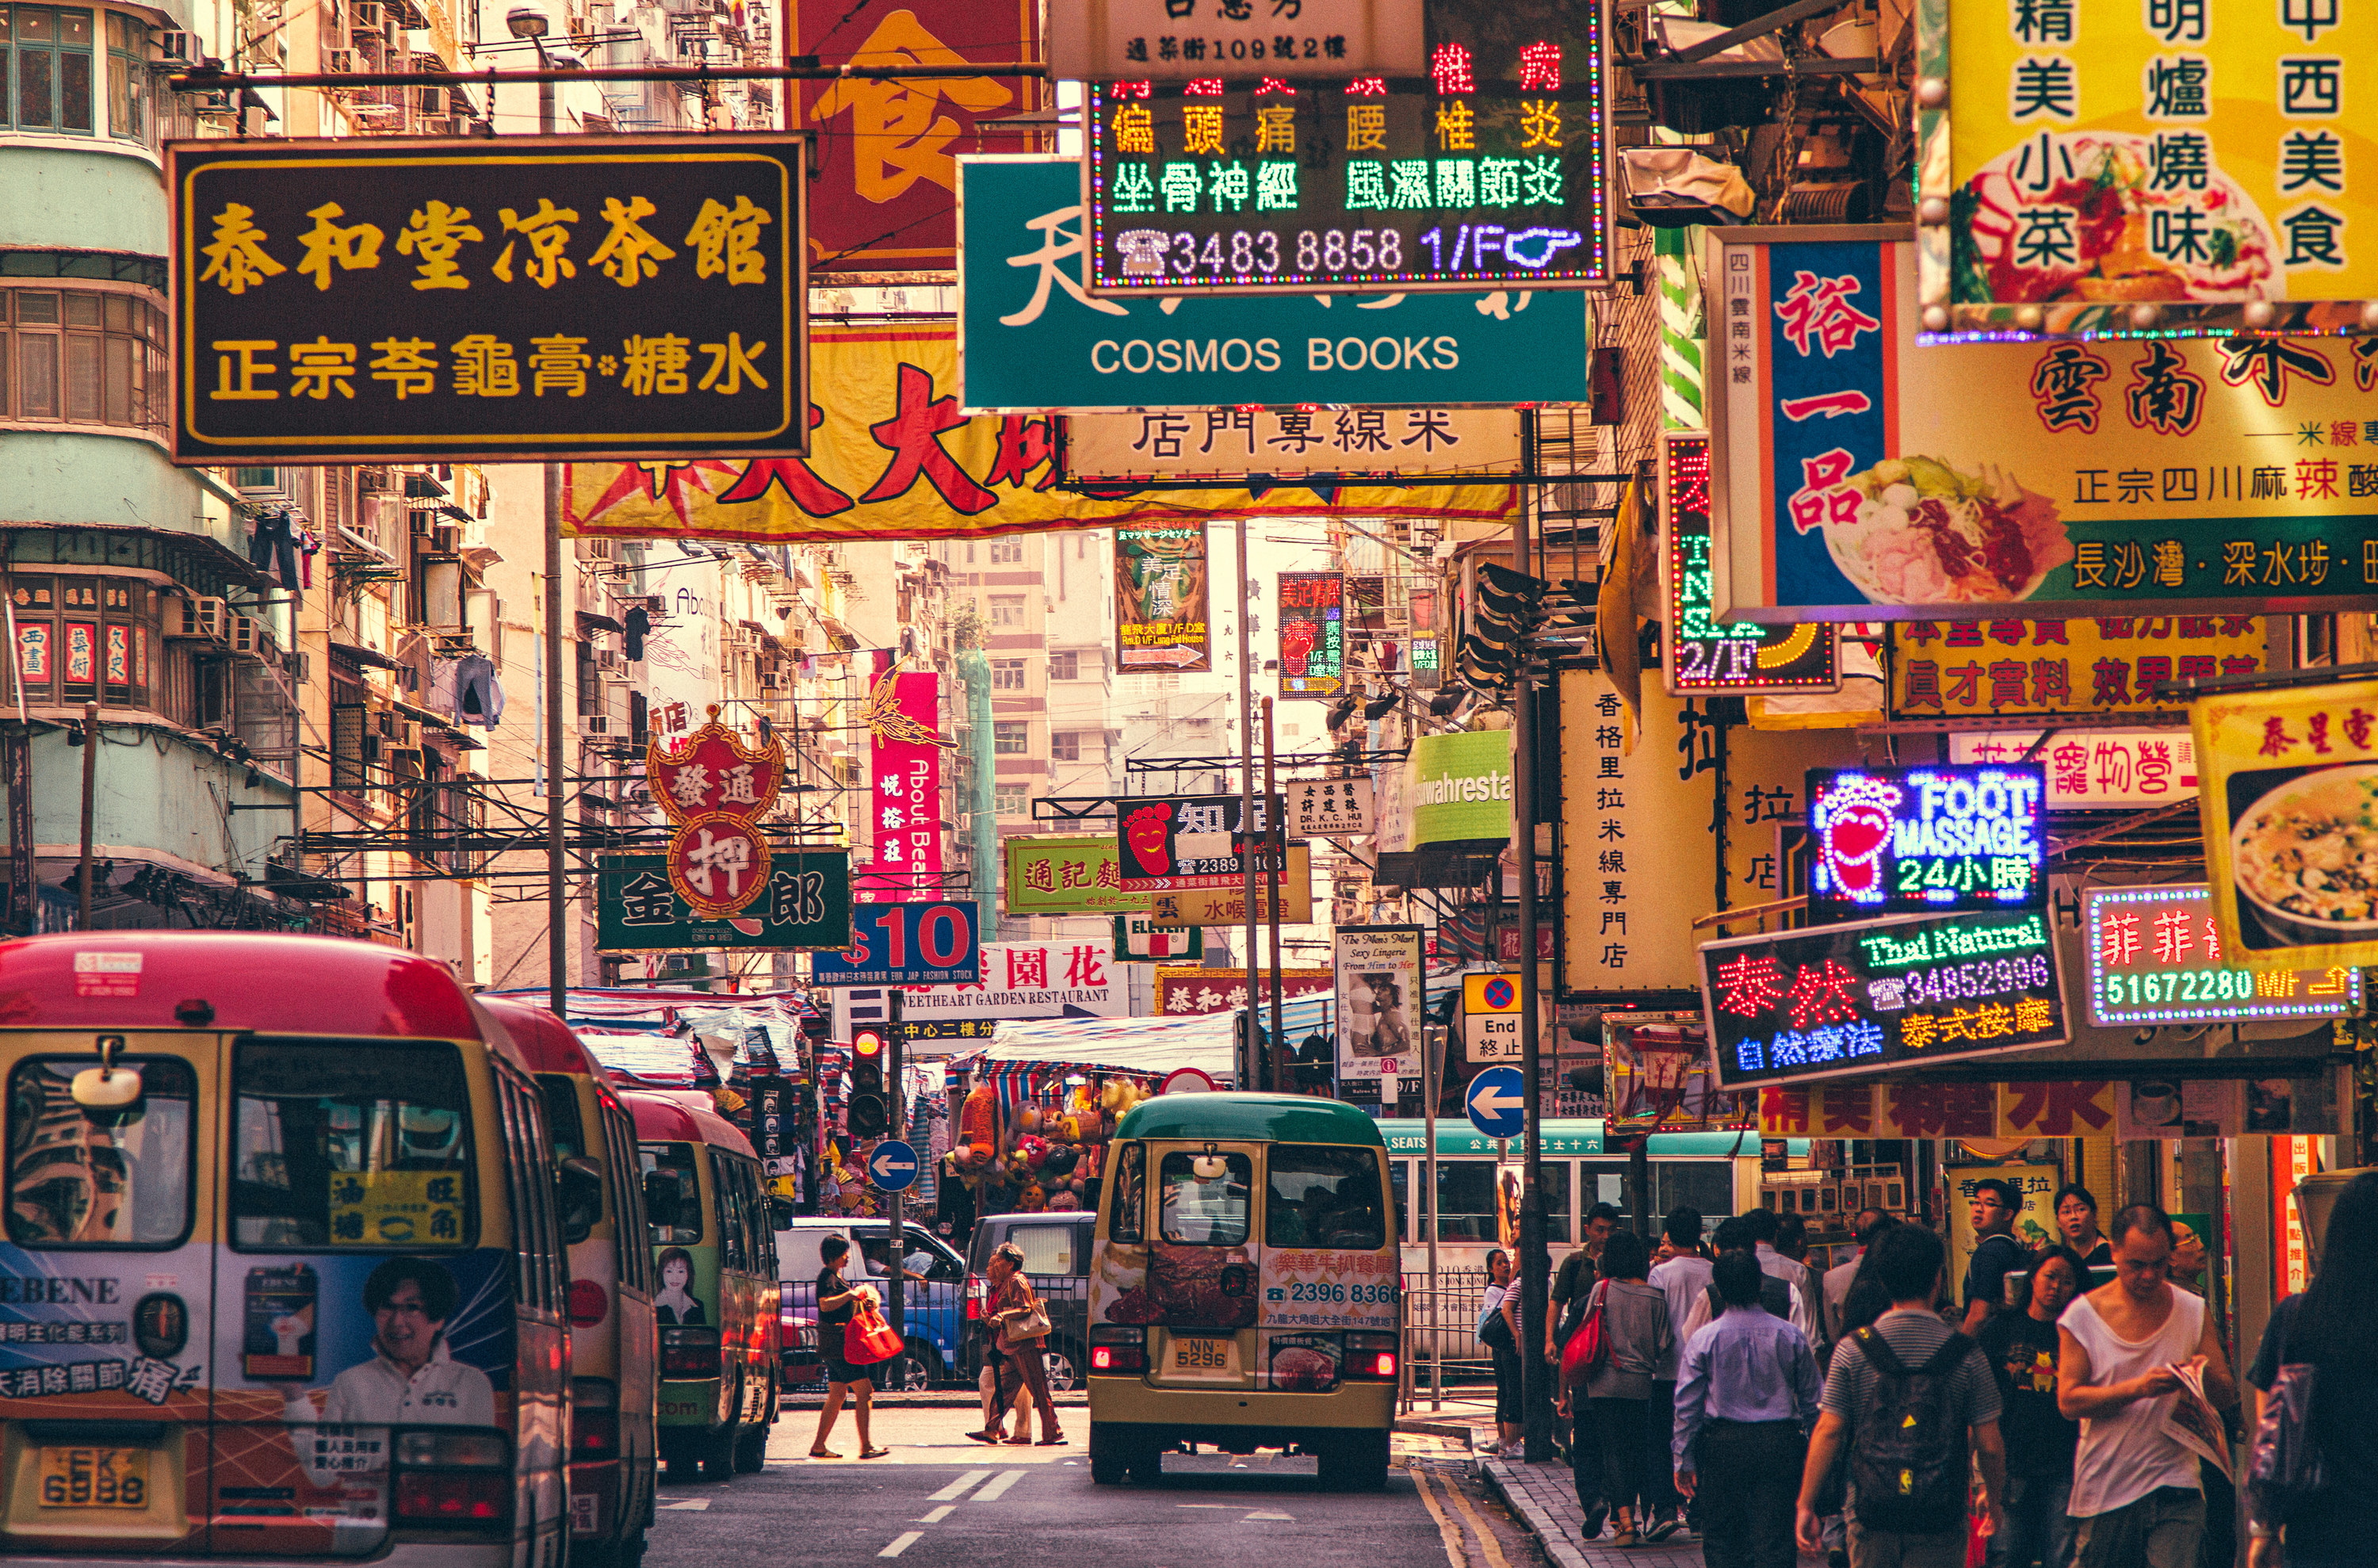 A busy street with signs and buses in Hong Kong